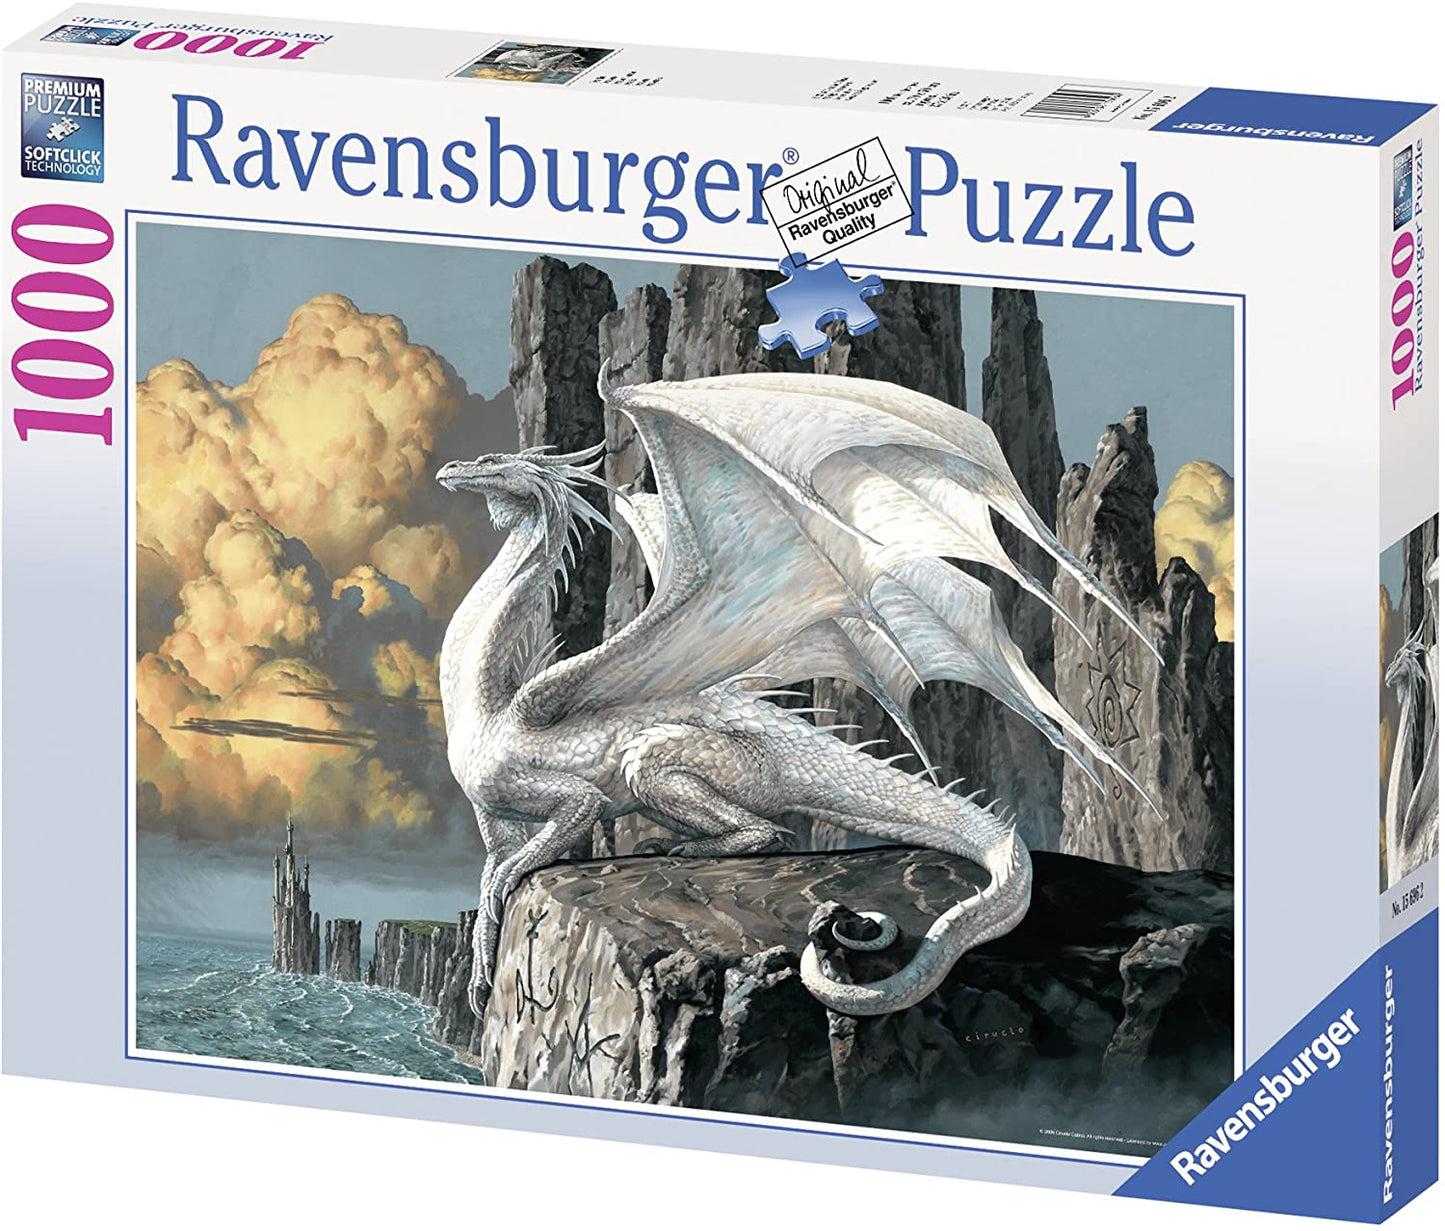 Ravensburger Dragon - 1000 Piece Jigsaw Puzzle for Adults – Every Piece is Unique, Softclick Technology Means Pieces Fit Together Perfectly (196388)